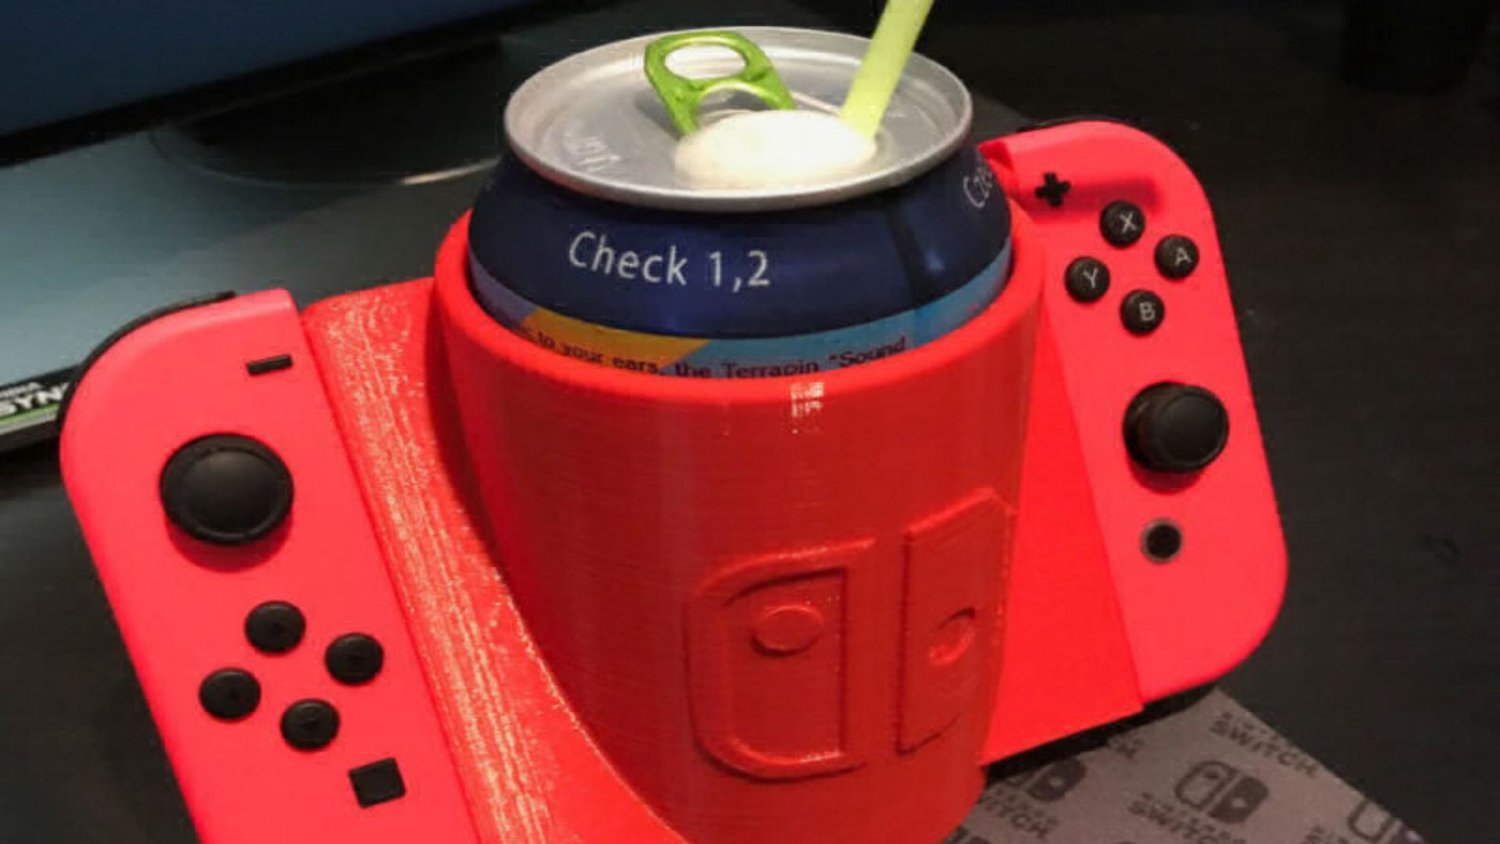 You can 3D Print Your Very Own NINTENDO Cup Holder With This Design — GameTyrant